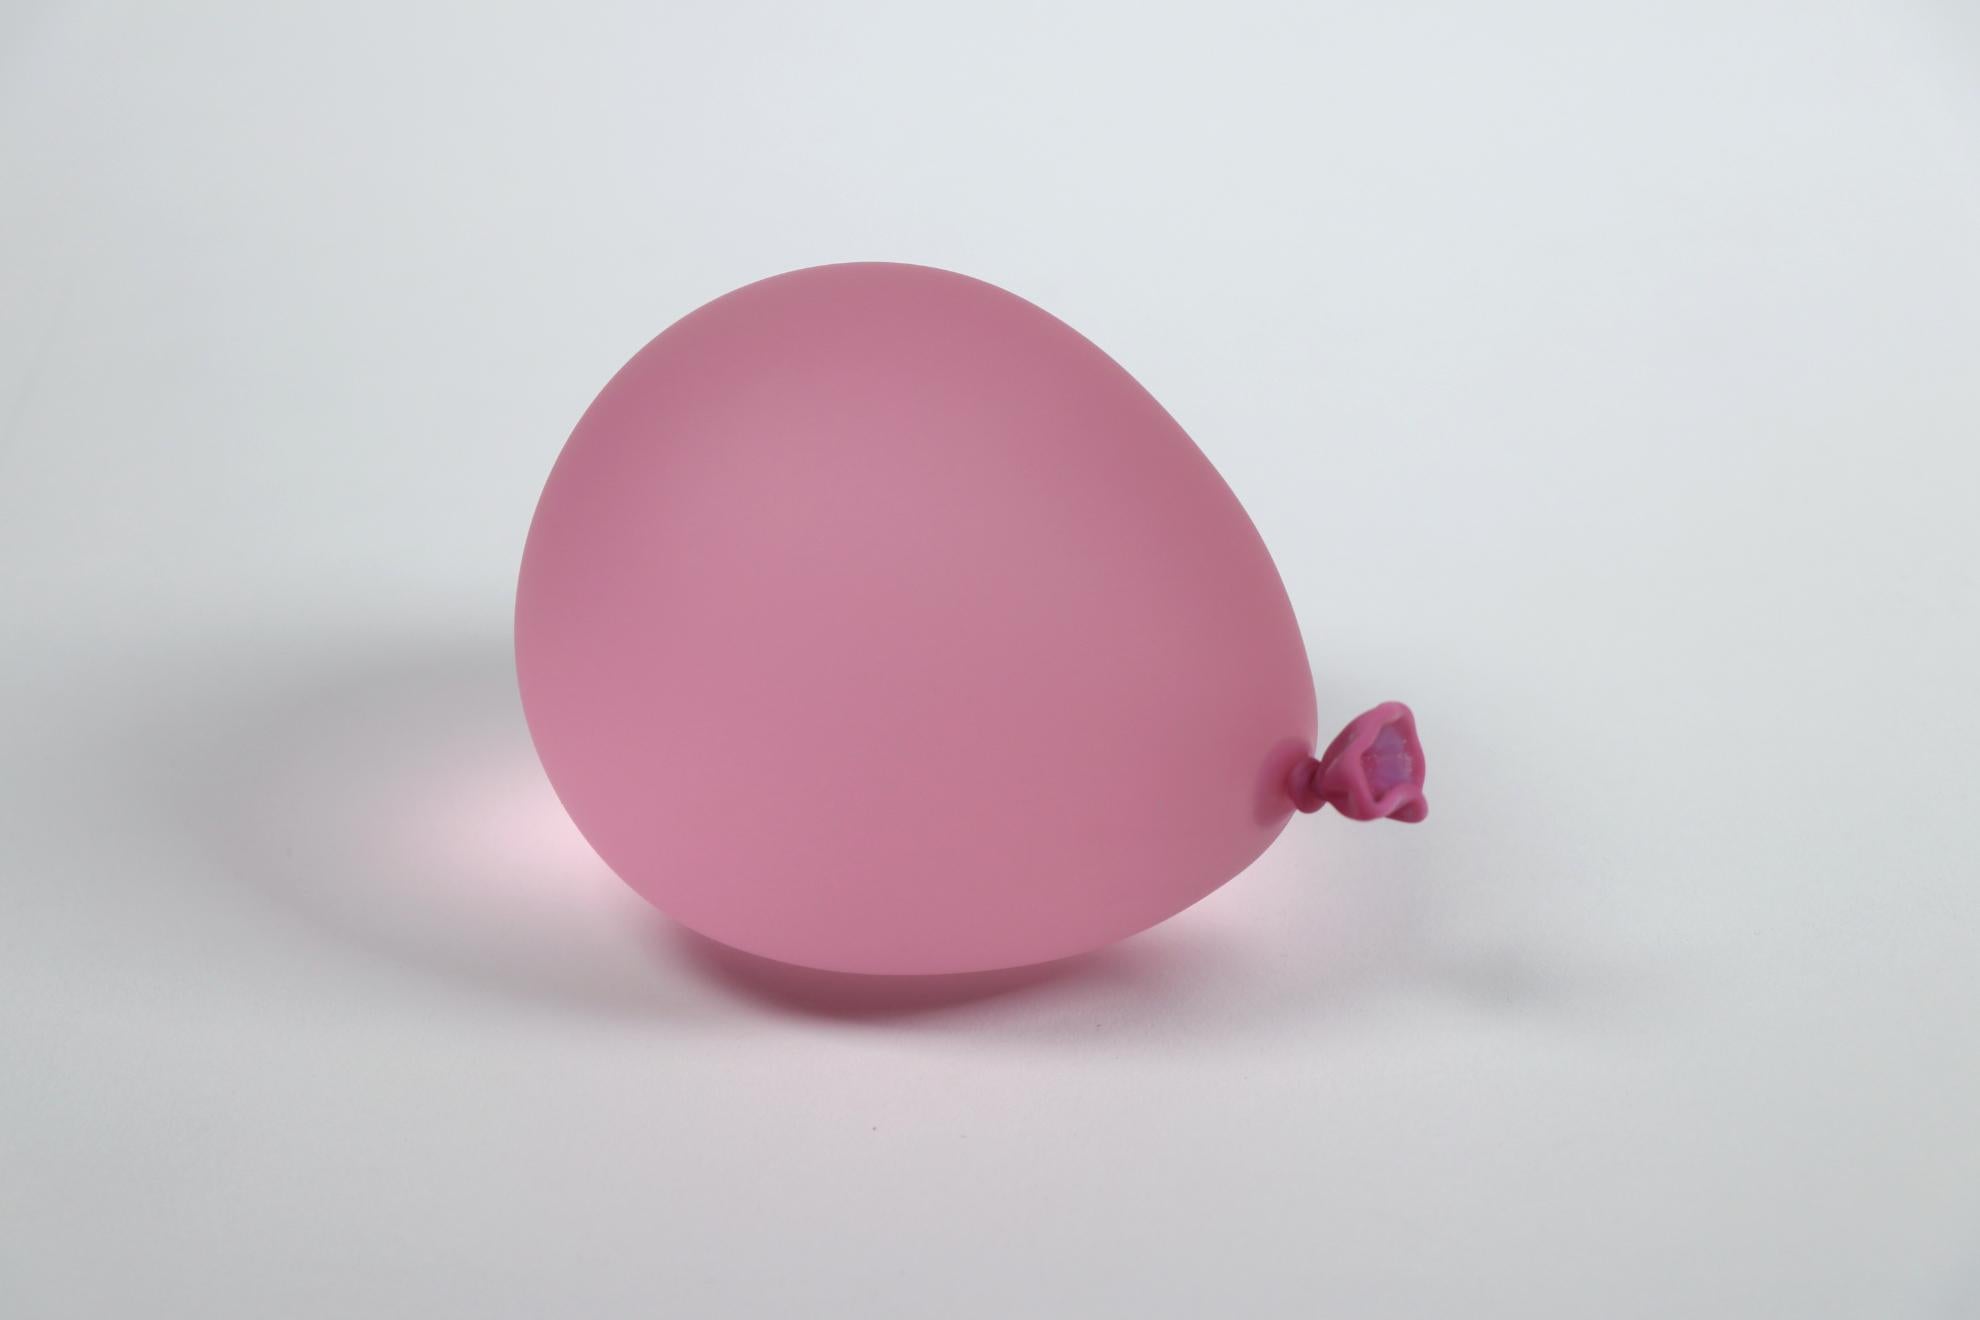 Pink hyperreal glass water balloon sculpture by Dylan Martinez. 

These hyperrealistic water balloons are made of solid sculpted glass sandblasted and acid-etched to resemble real water balloons. The sculptures are made in small batches, and each